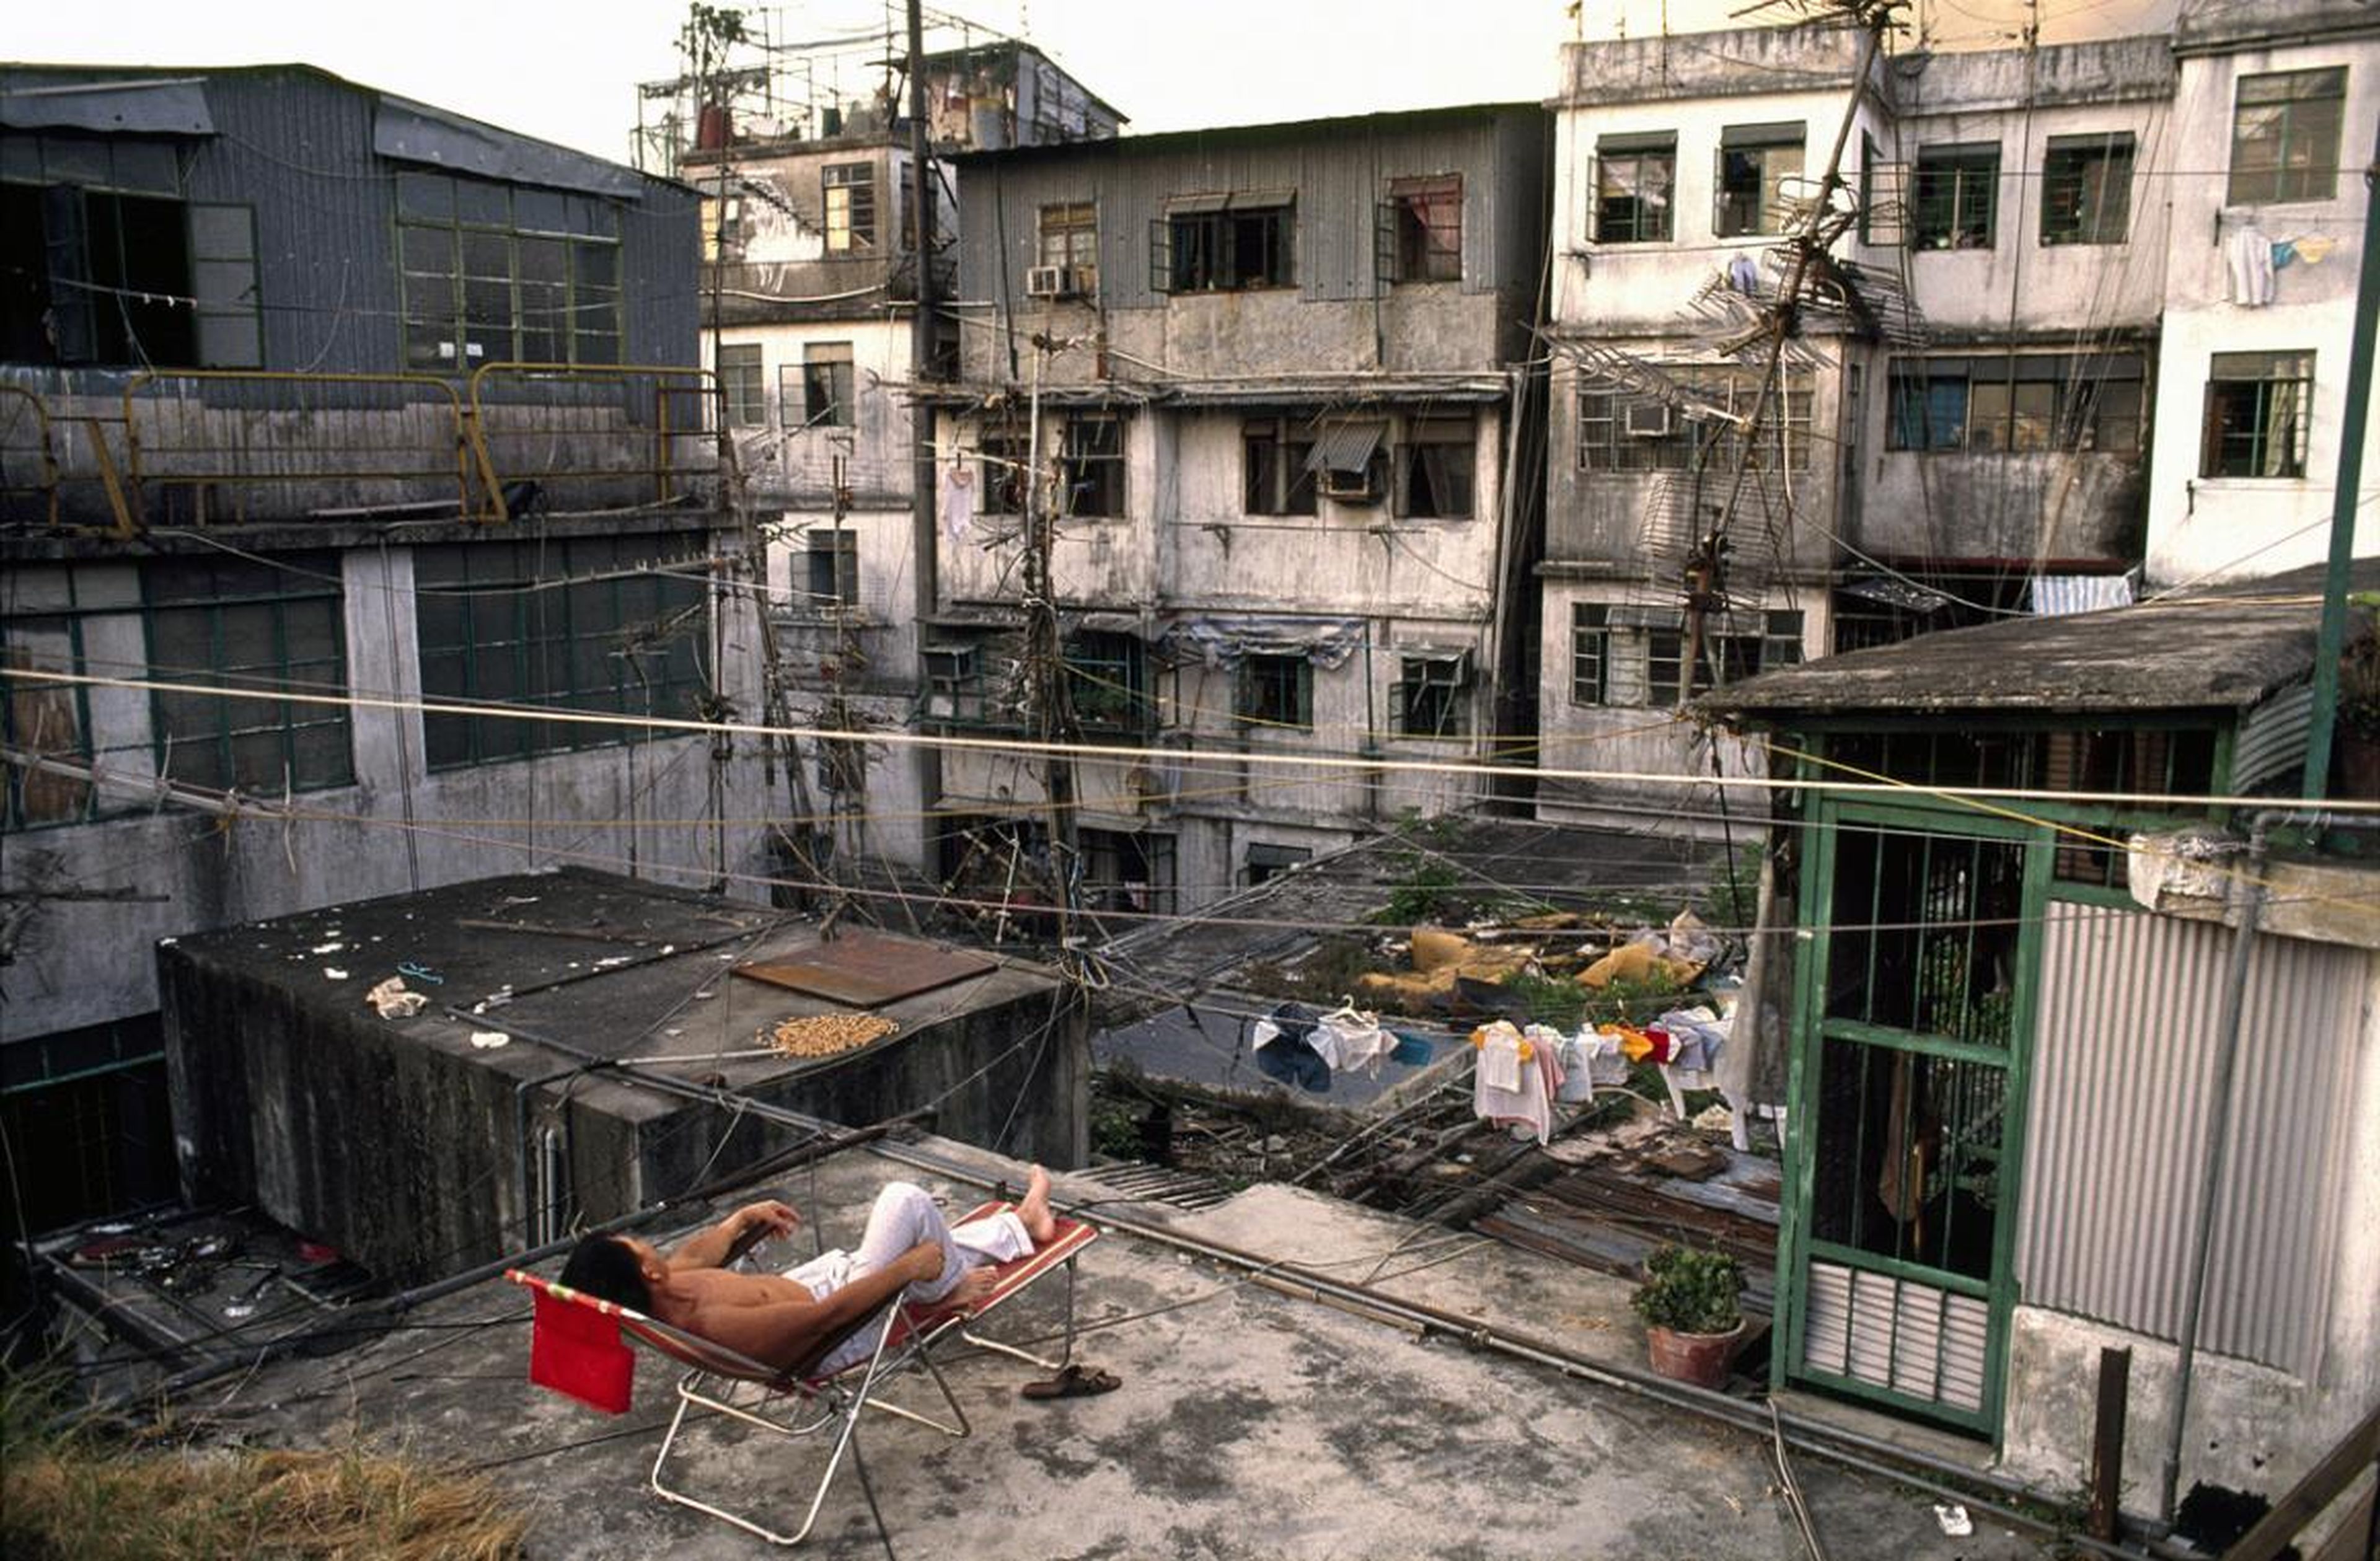 Because of the smelly, humid conditions down below, the rooftops of Kowloon would turn into a communal hangout during the afternoons and evenings. People would hang out, do laundry or homework, or practice instruments.